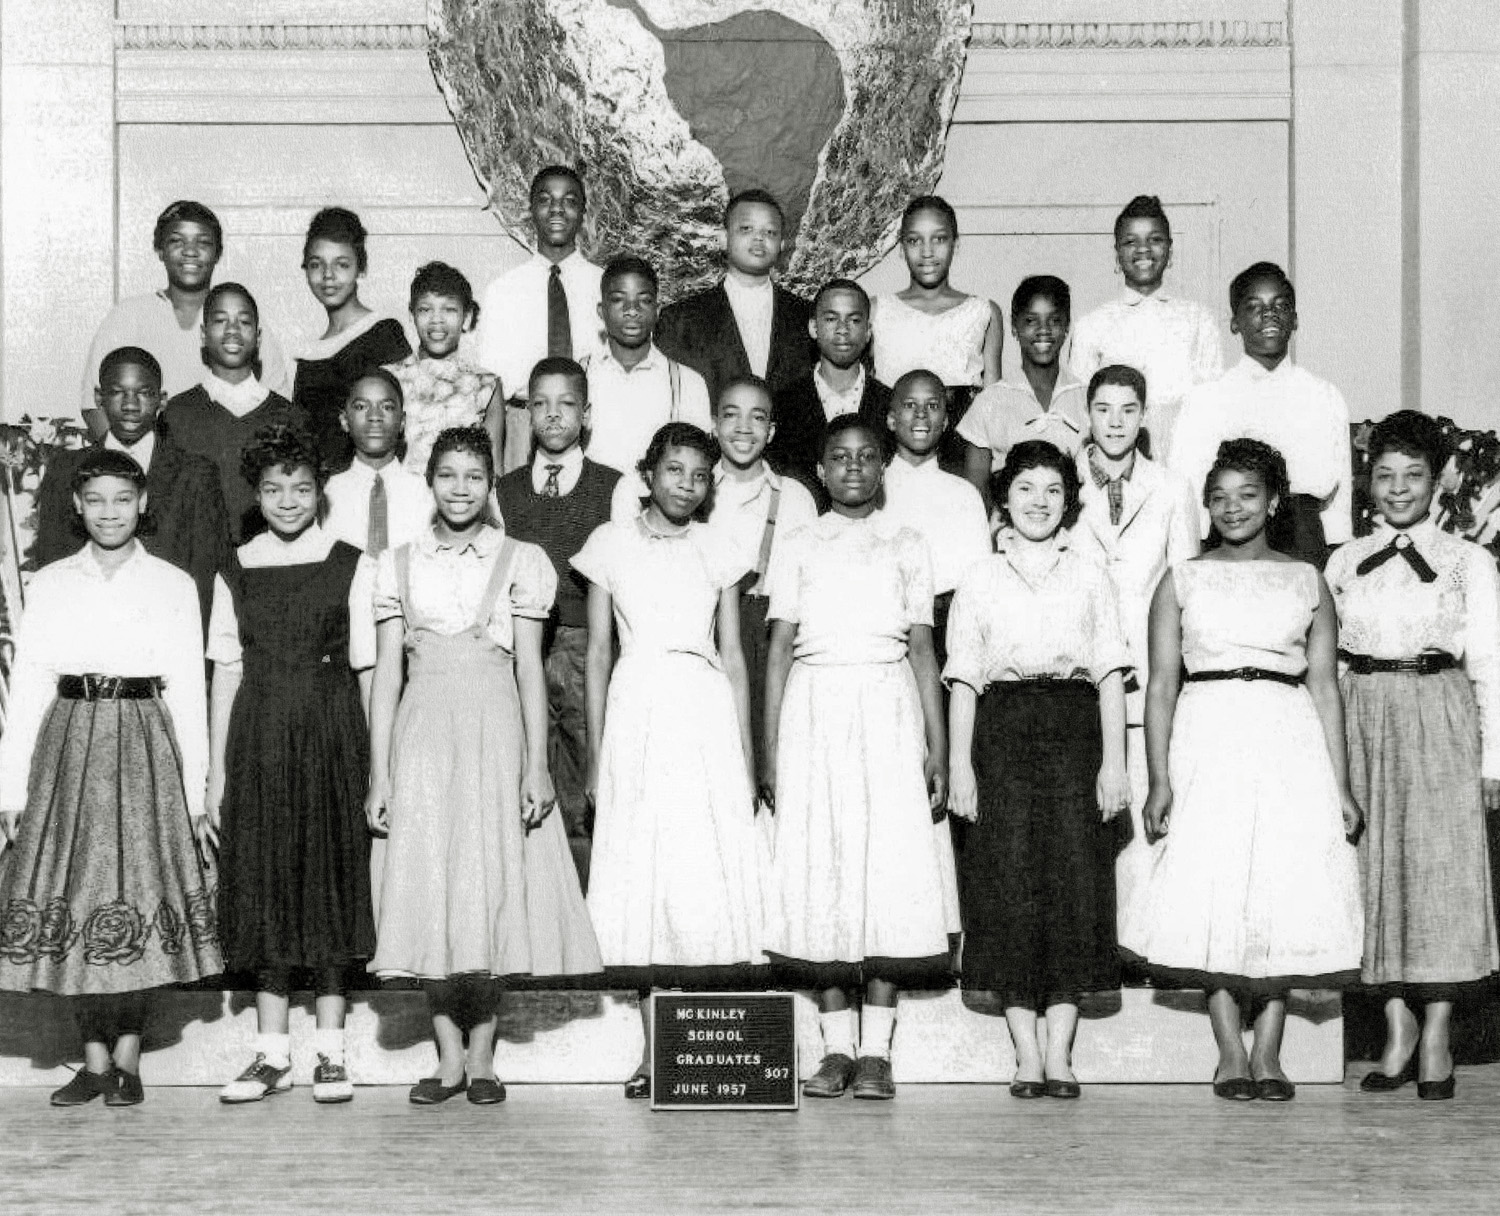 Taken in 1957, west side of Chicago. This was the home room group that graduated with me. I'm the little guy, 2nd row, 2nd from the right. Standing next to me on the left is Finn; we had most of the same classes together, including music, and played in the band together. View full size.